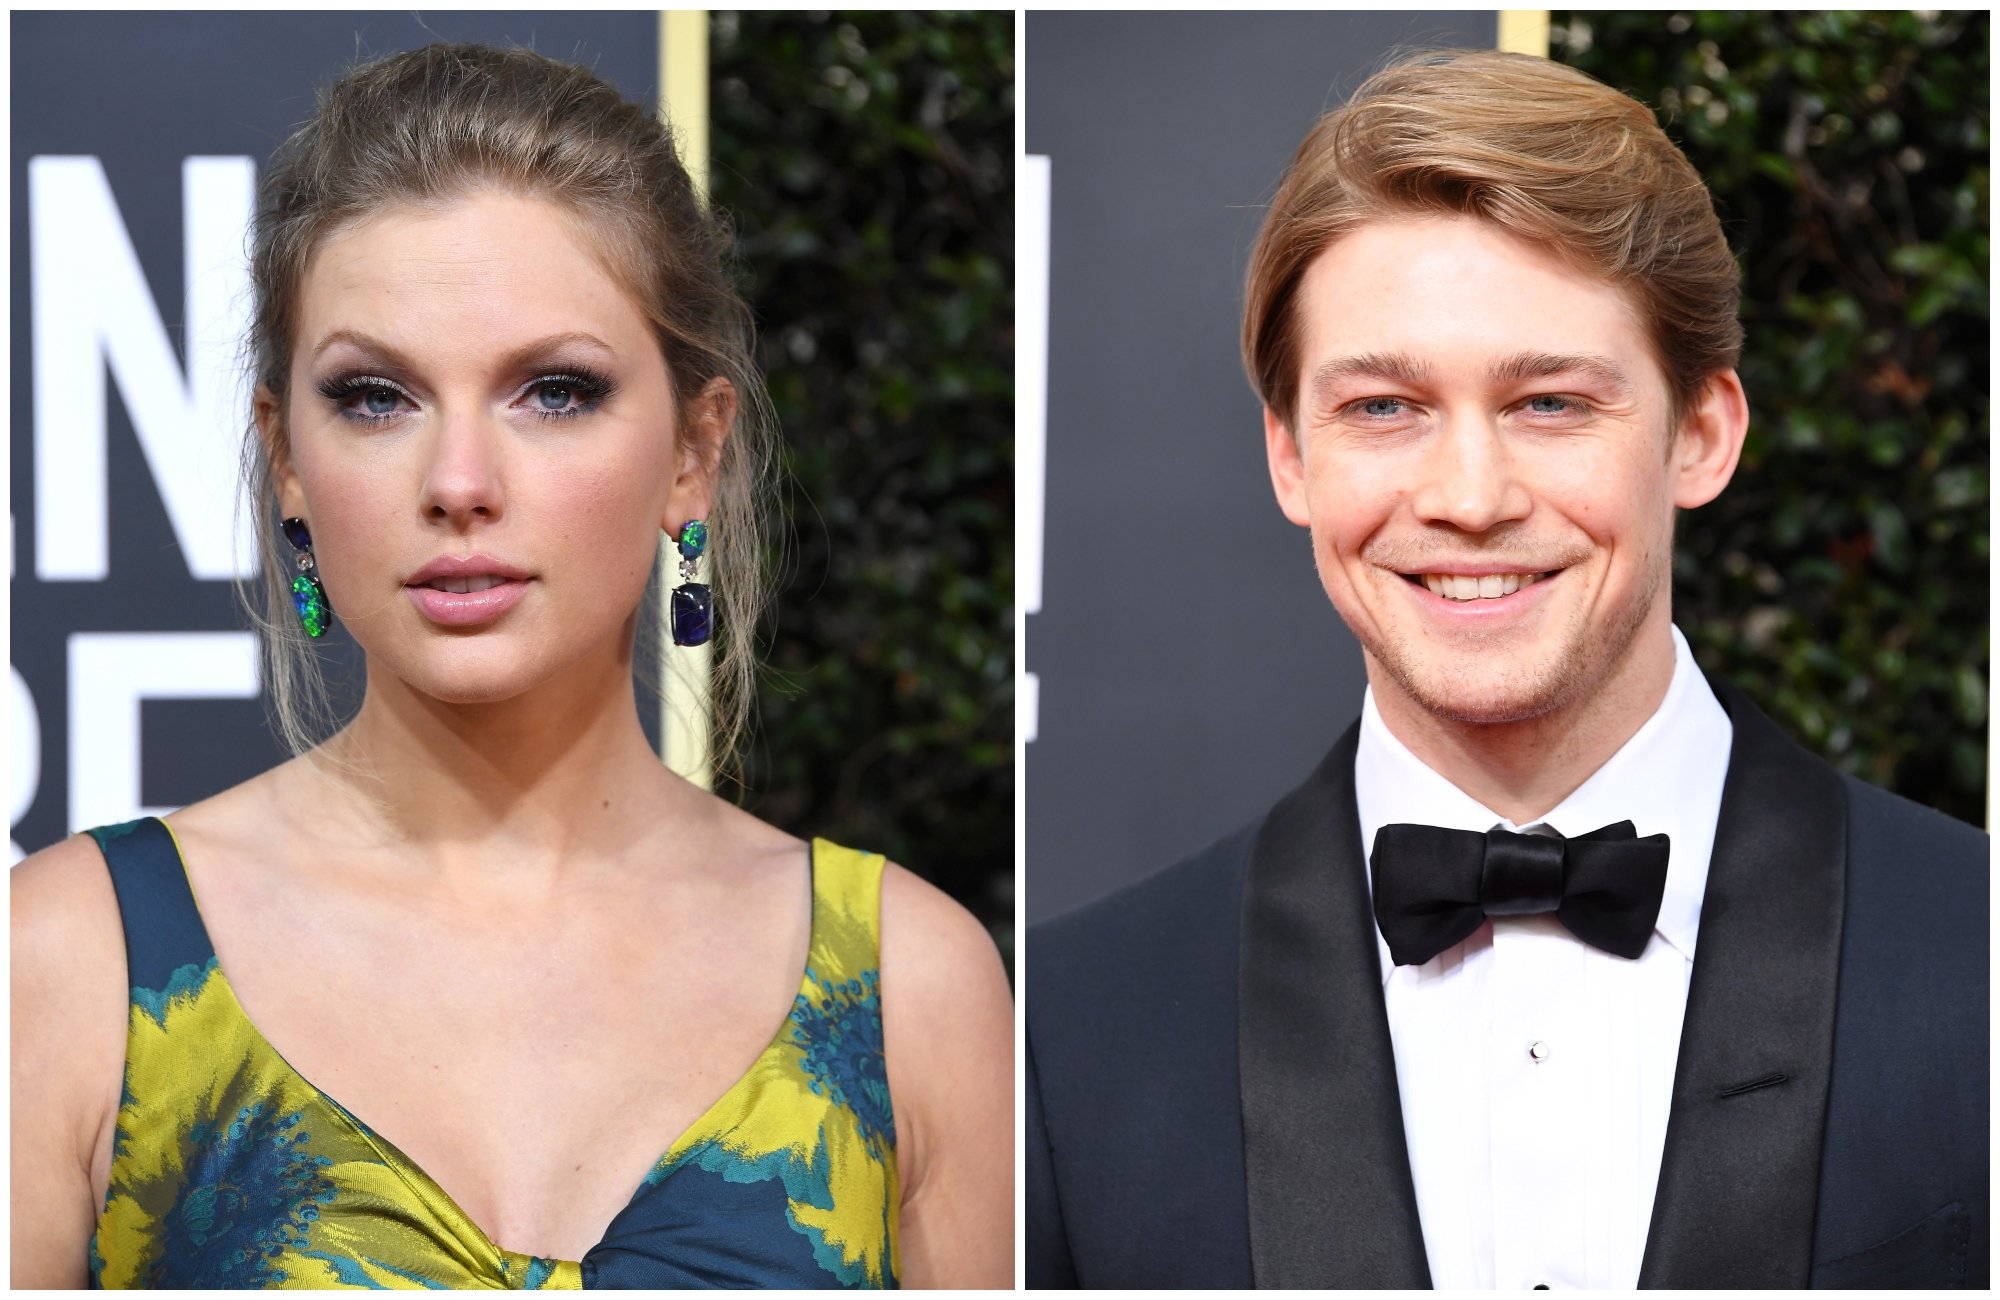 composite image of Taylor Swift and Joe Alwyn at the 2020 Golden Globe Awards